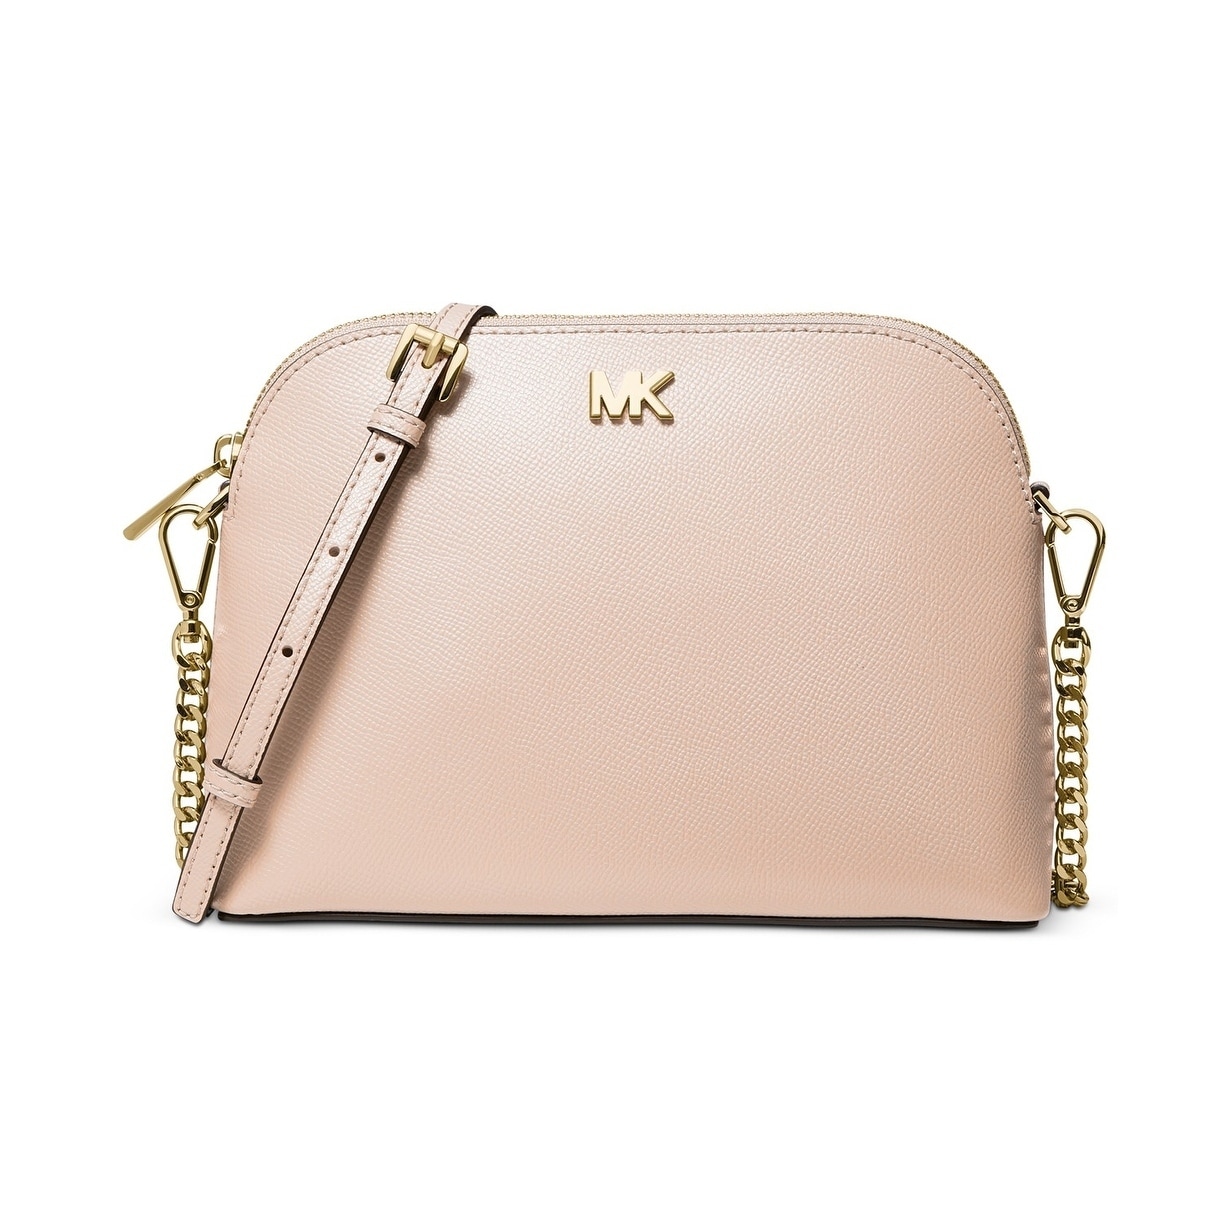 michael kors pink and gold purse